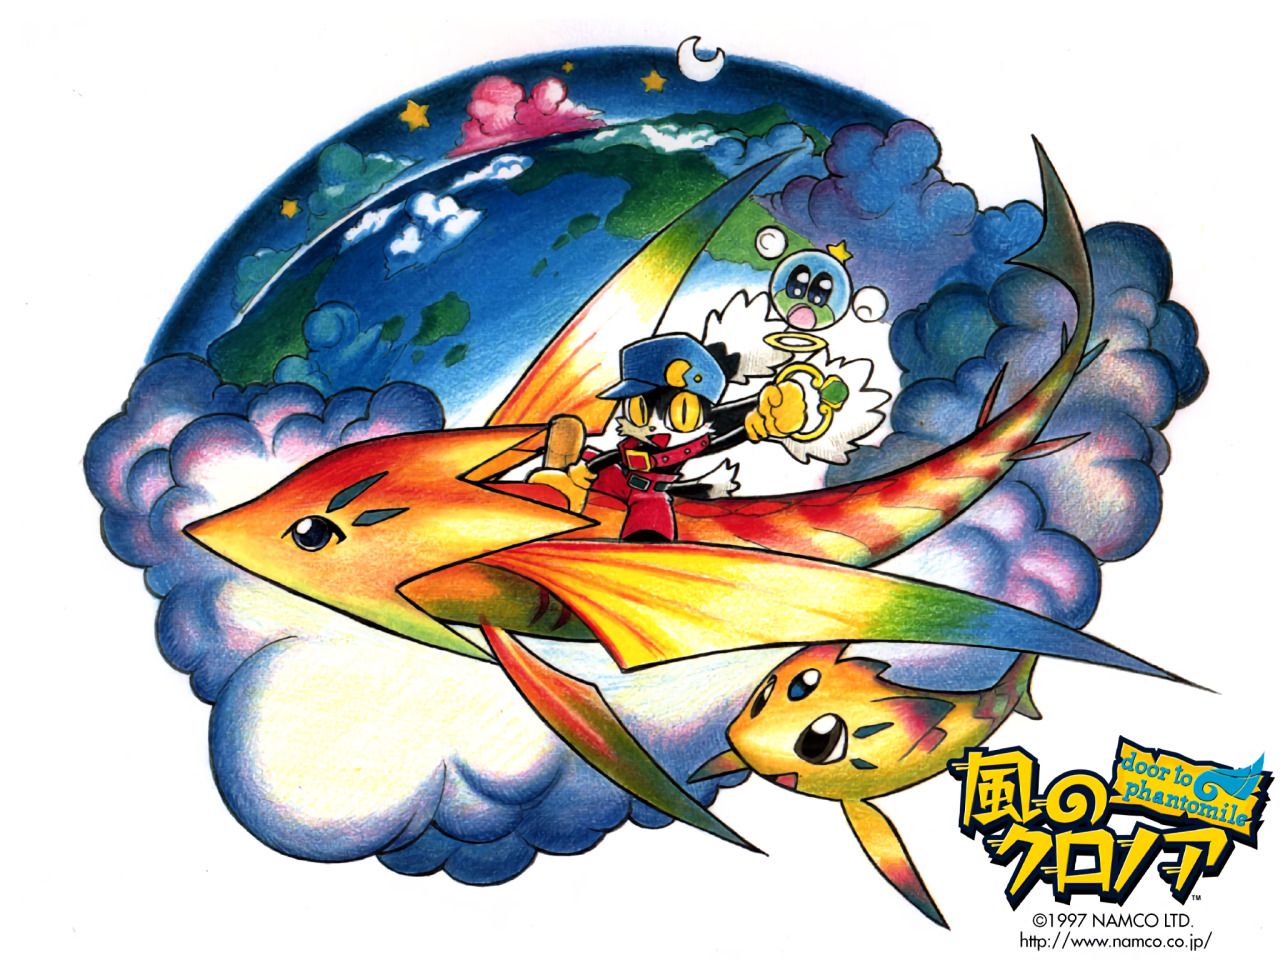 Artwork from the game depicting the main character riding a flying fish through the high atmosphere.